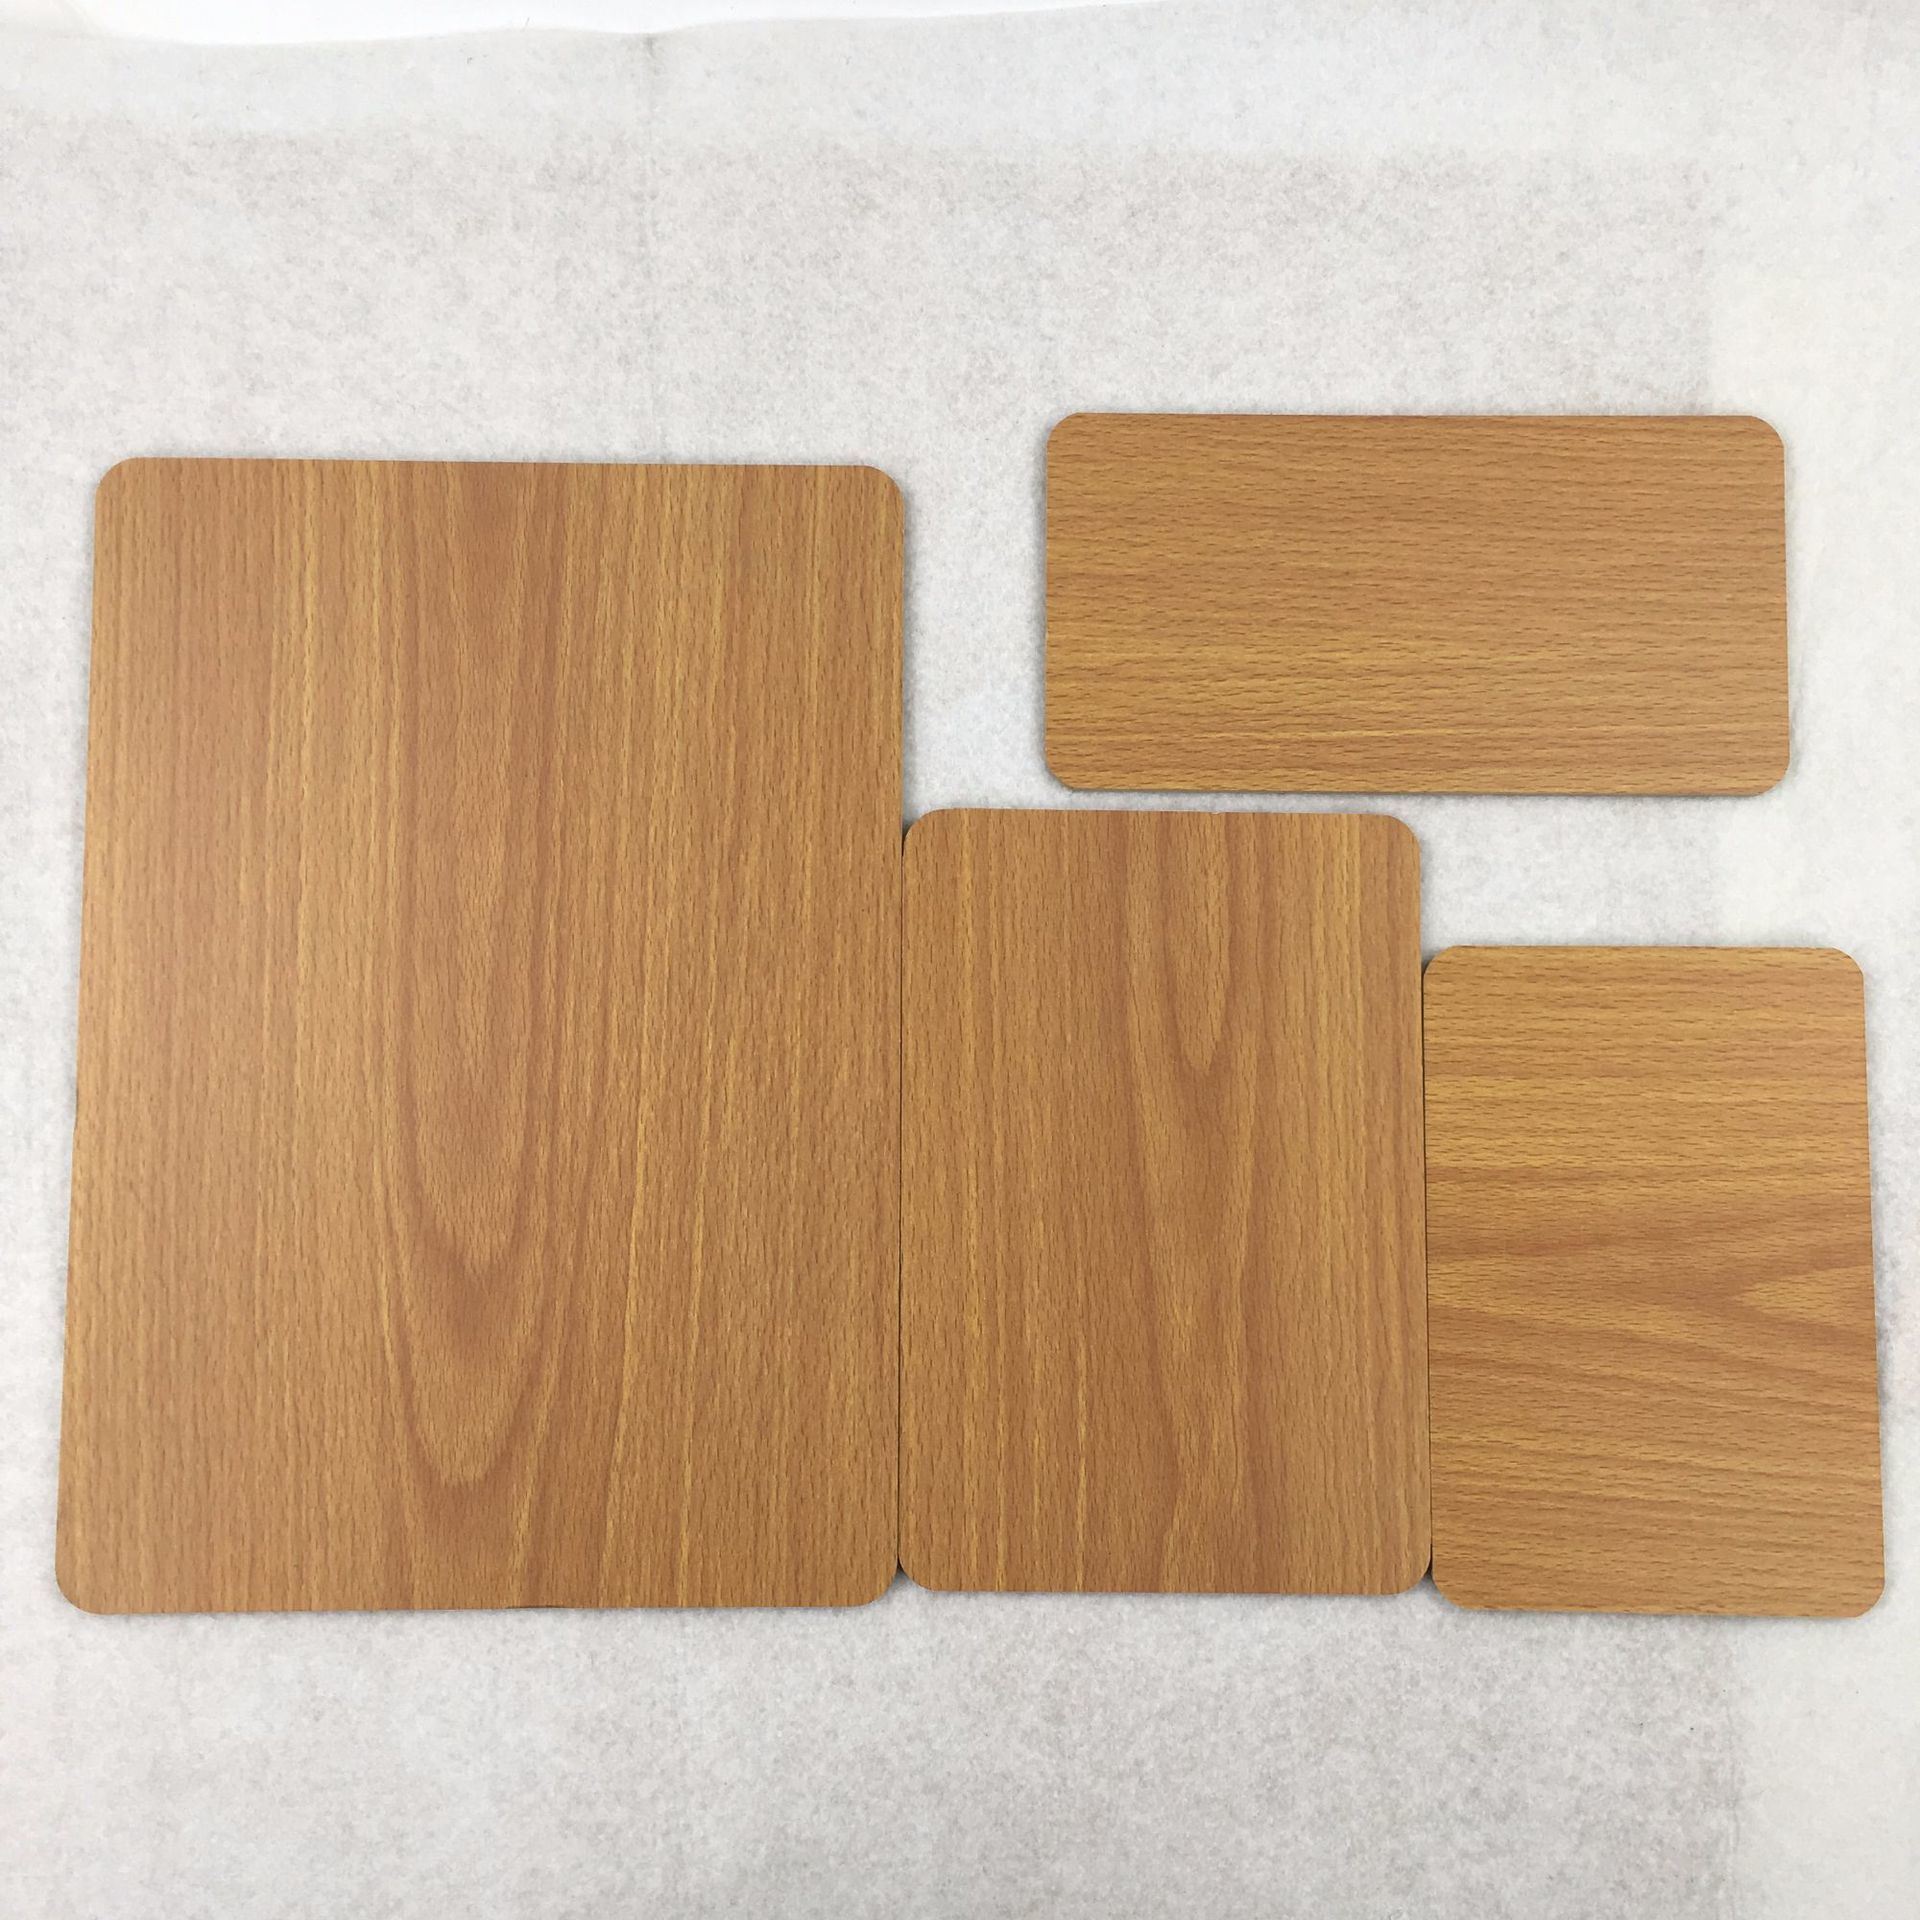 1830X2750 1220X2800 2100X2800 Large Size Melamine Filmed MDF Board for Furniture Decoration and Building Material